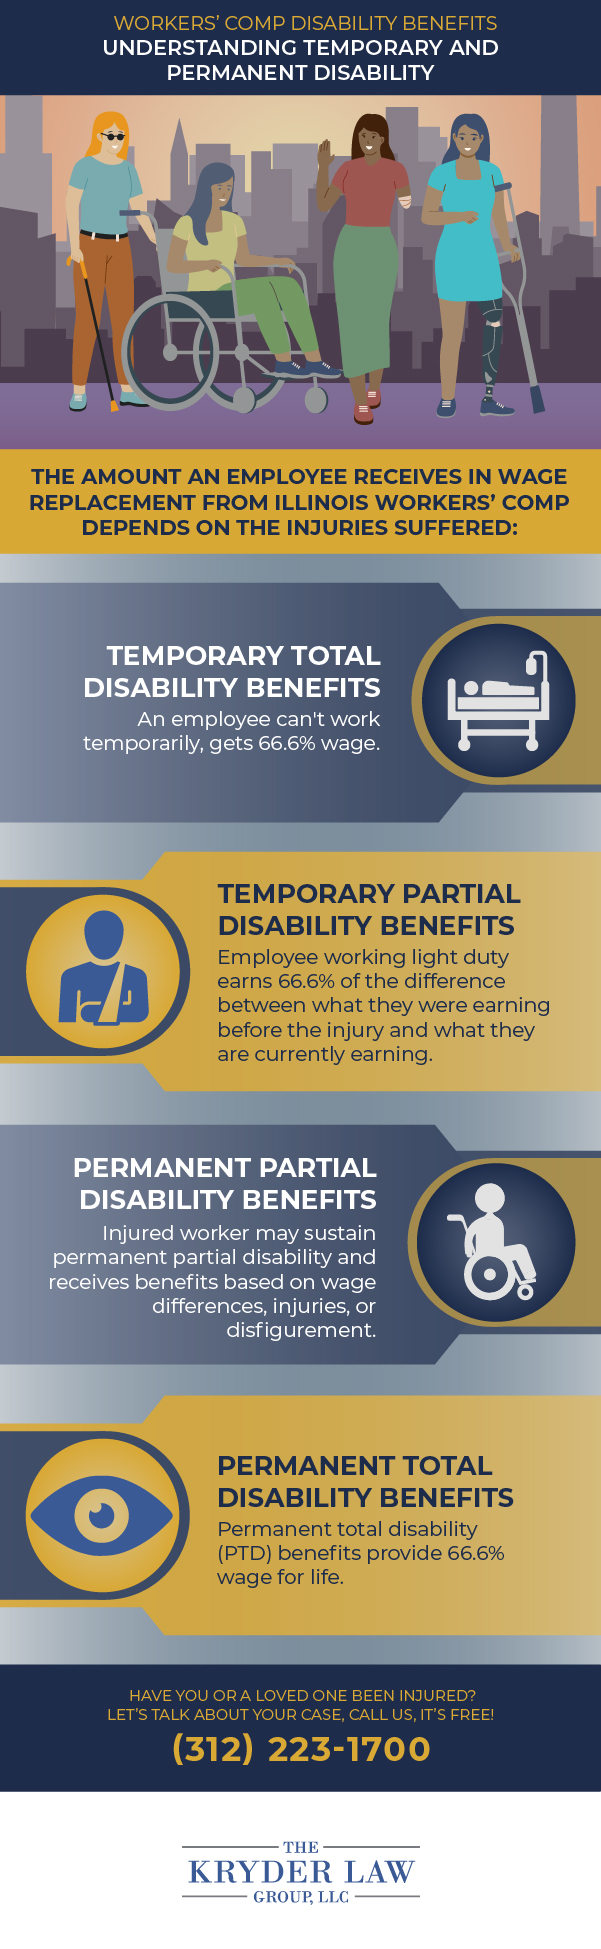 Workers' Comp Disability Benefits - Understanding Temporary and Permanent Disability